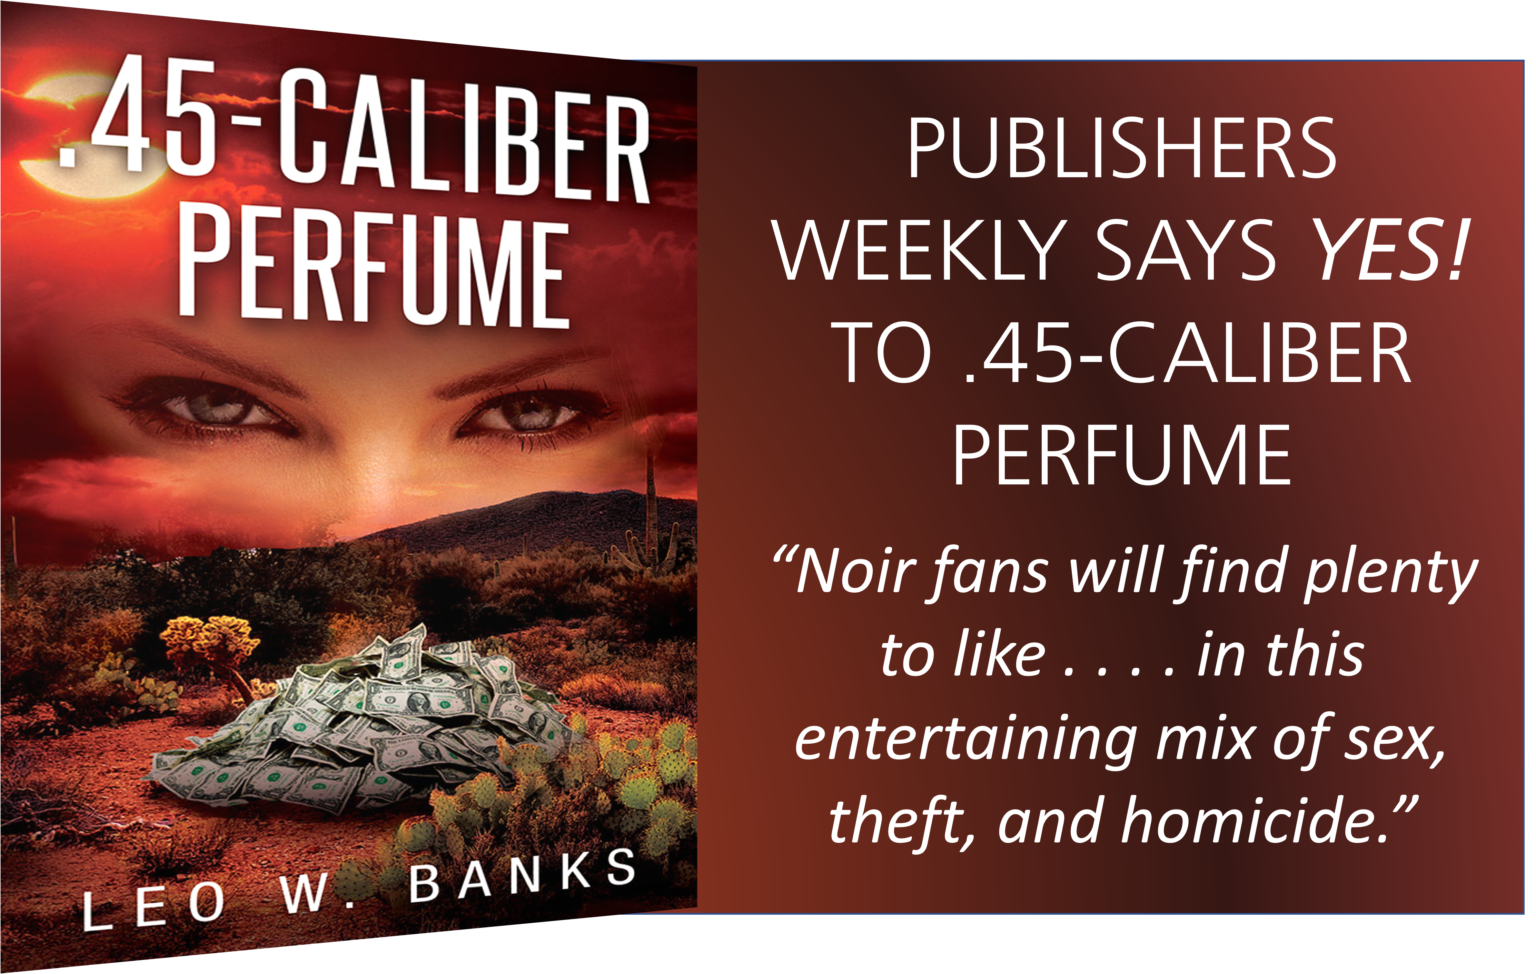 Publisher's Weekly says yes to .45-Caliber Perfume